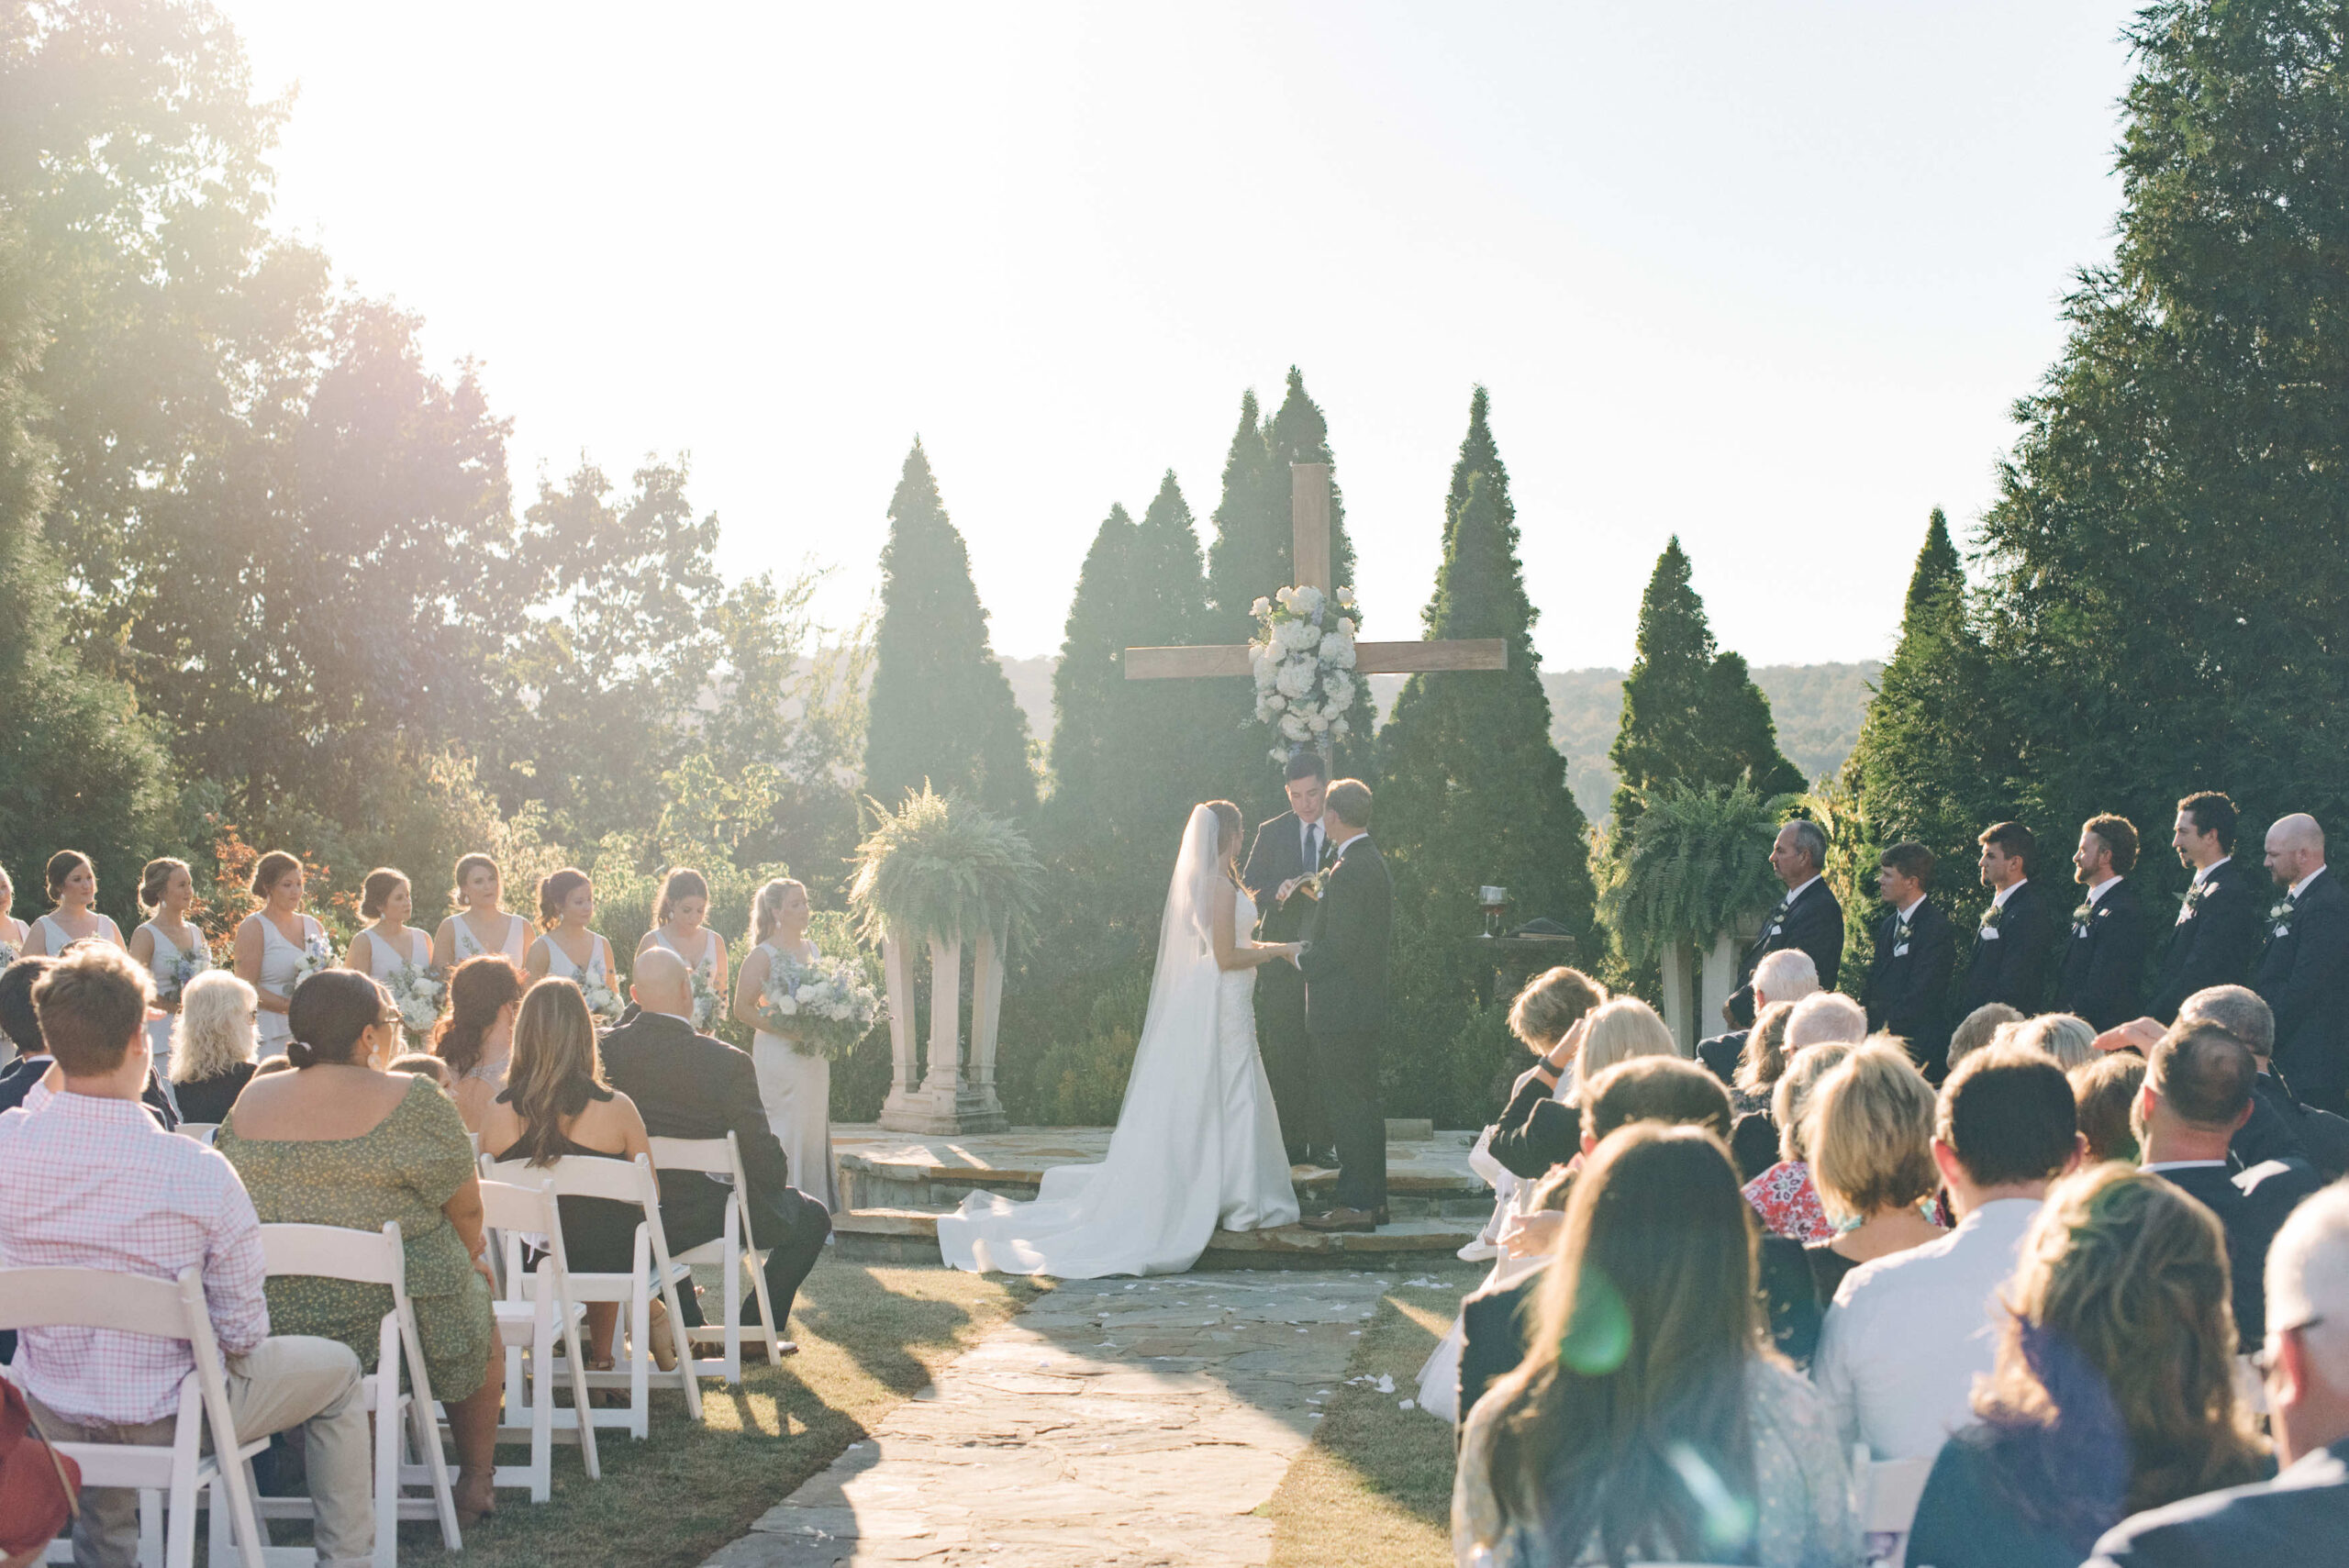 A dreamy film edit photo of a wedding ceremony at sunset in the Gardens at Park Crest Events wedding venue in Hoover, AL